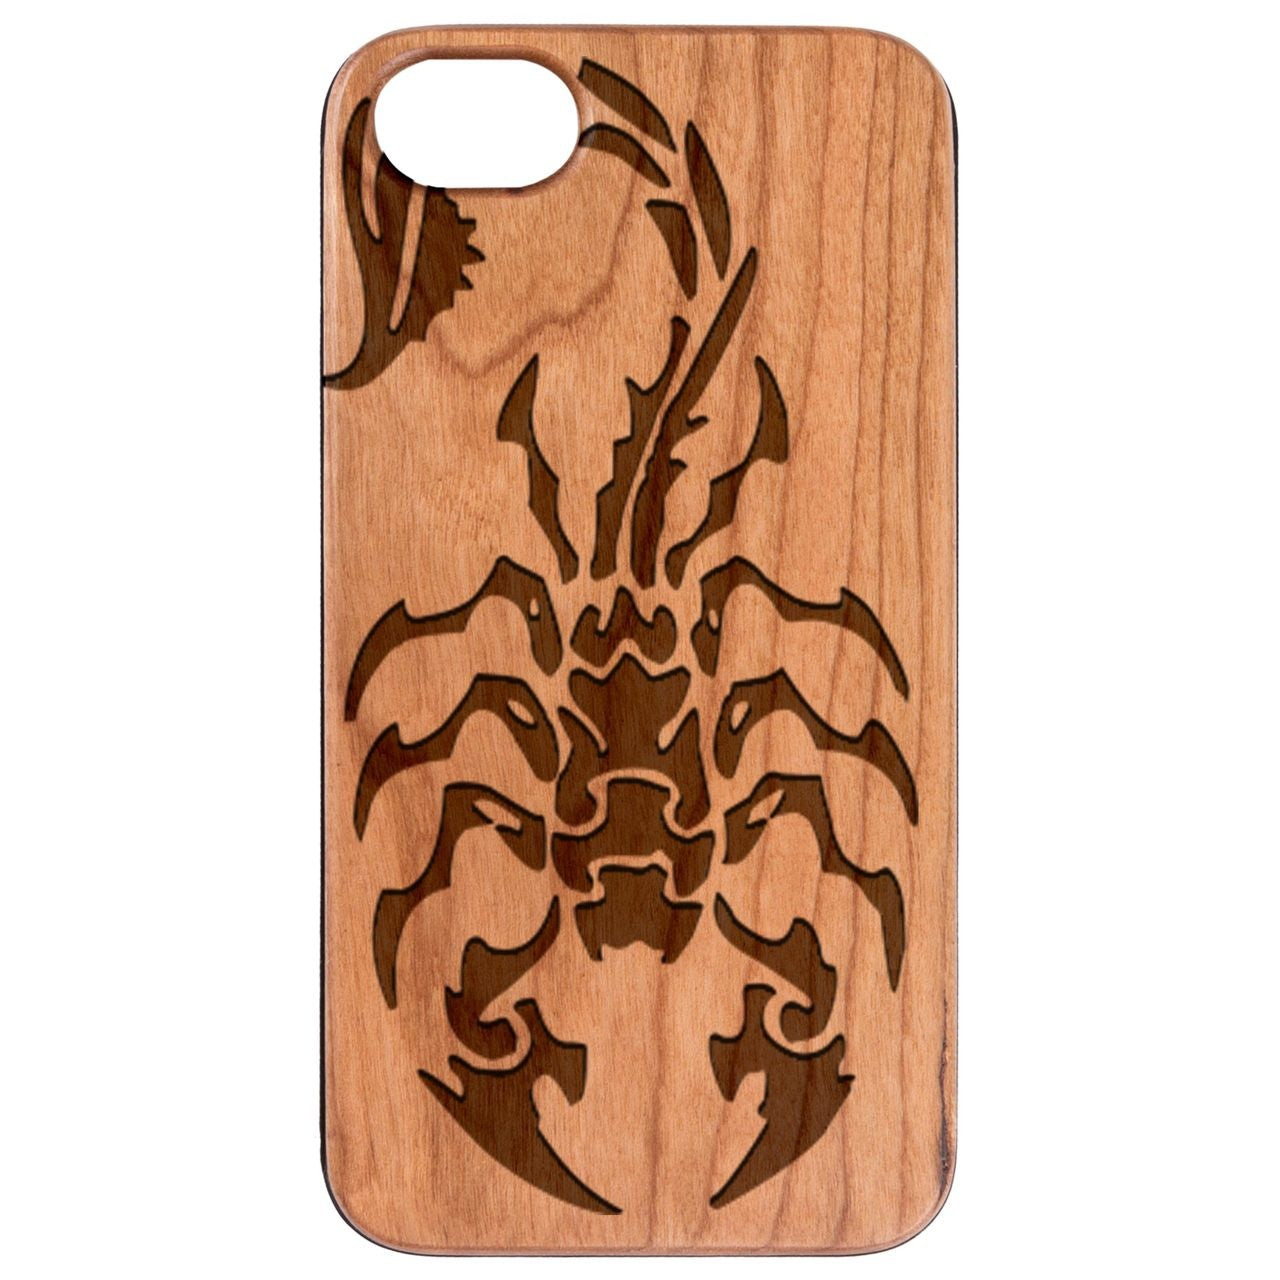  Scorpion - Engraved - Wooden Phone Case - IPhone 13 Models